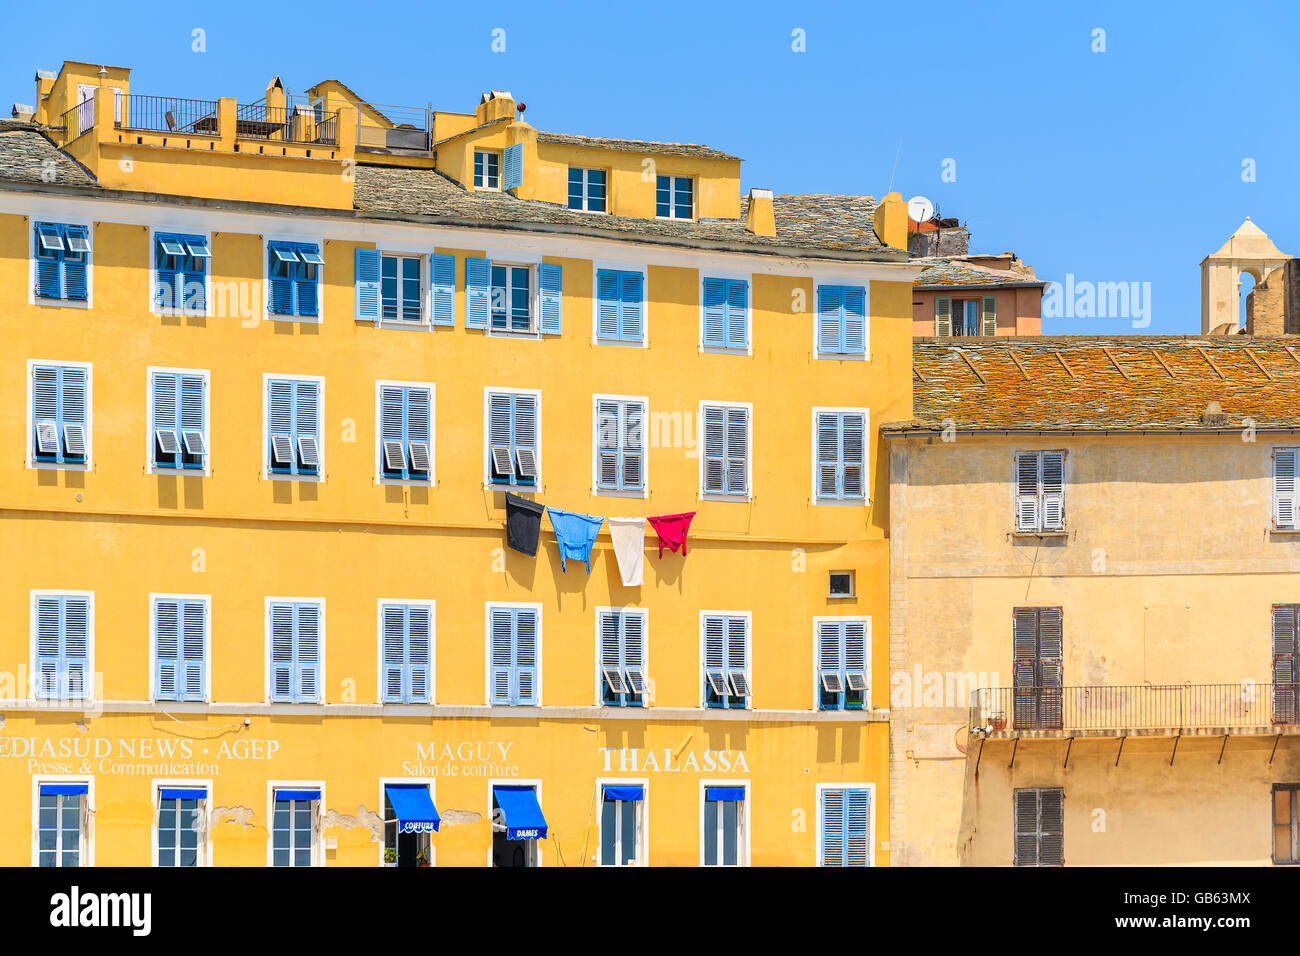 BASTIA PORT, CORSICA ISLAND - JUL 4, 2015: laundry hanging out of a typical Corsican house facade in Bastia port which is one of Stock Photo